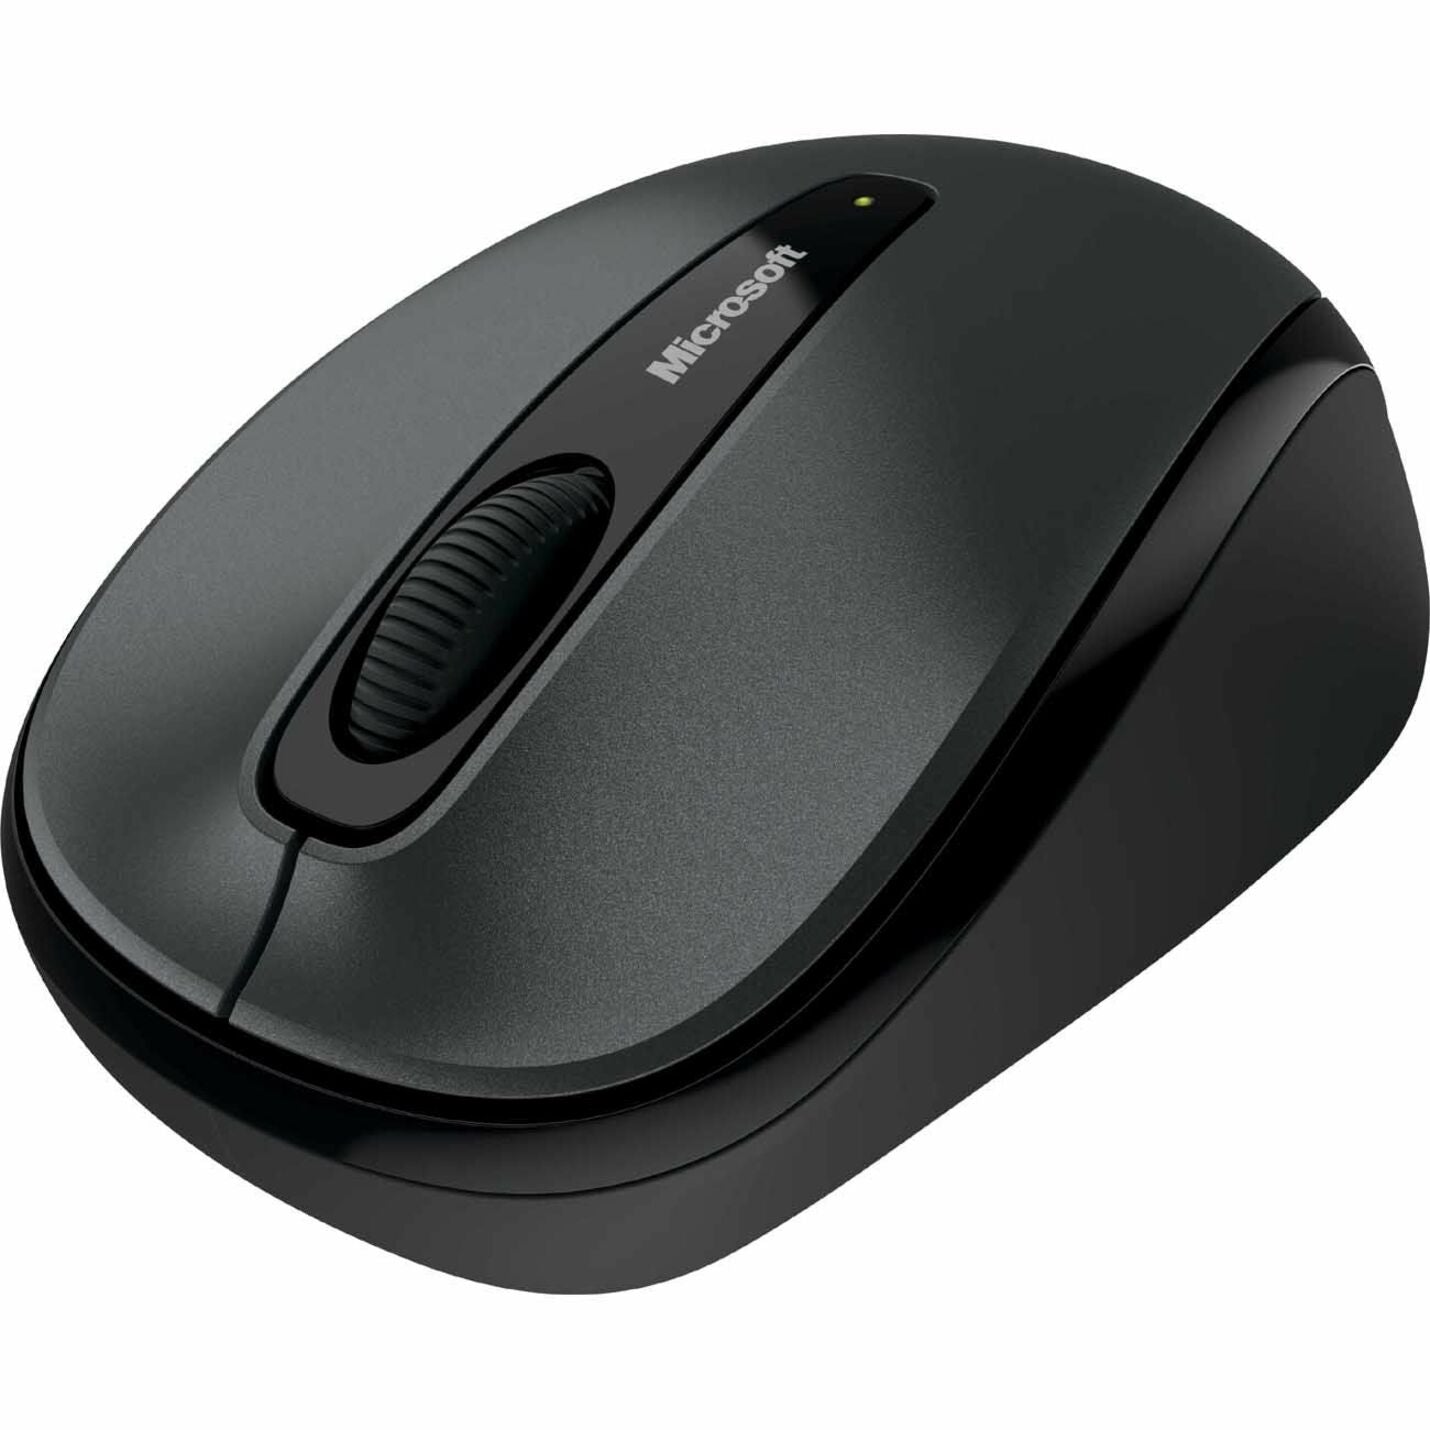 Microsoft 3500 Wireless Mobile Mouse - Gray [Discontinued]